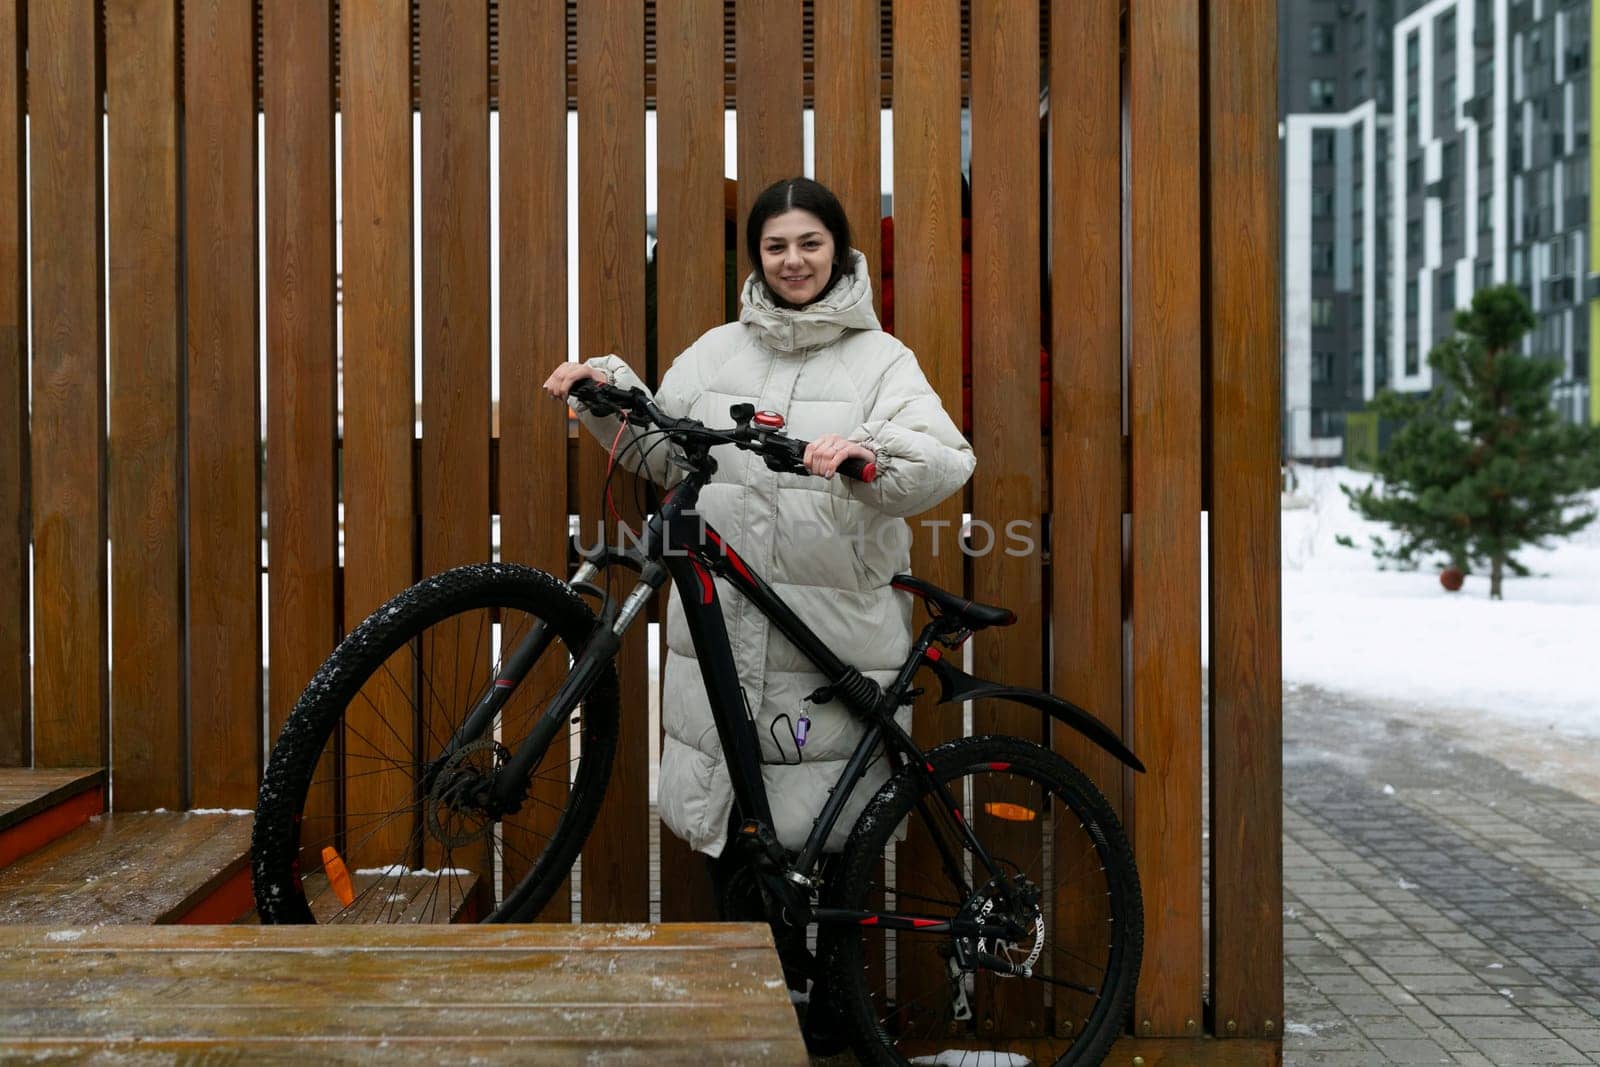 A woman is standing next to a bike in front of a wooden fence. She appears to be adjusting something on the bike. The setting is outdoors in a residential area.